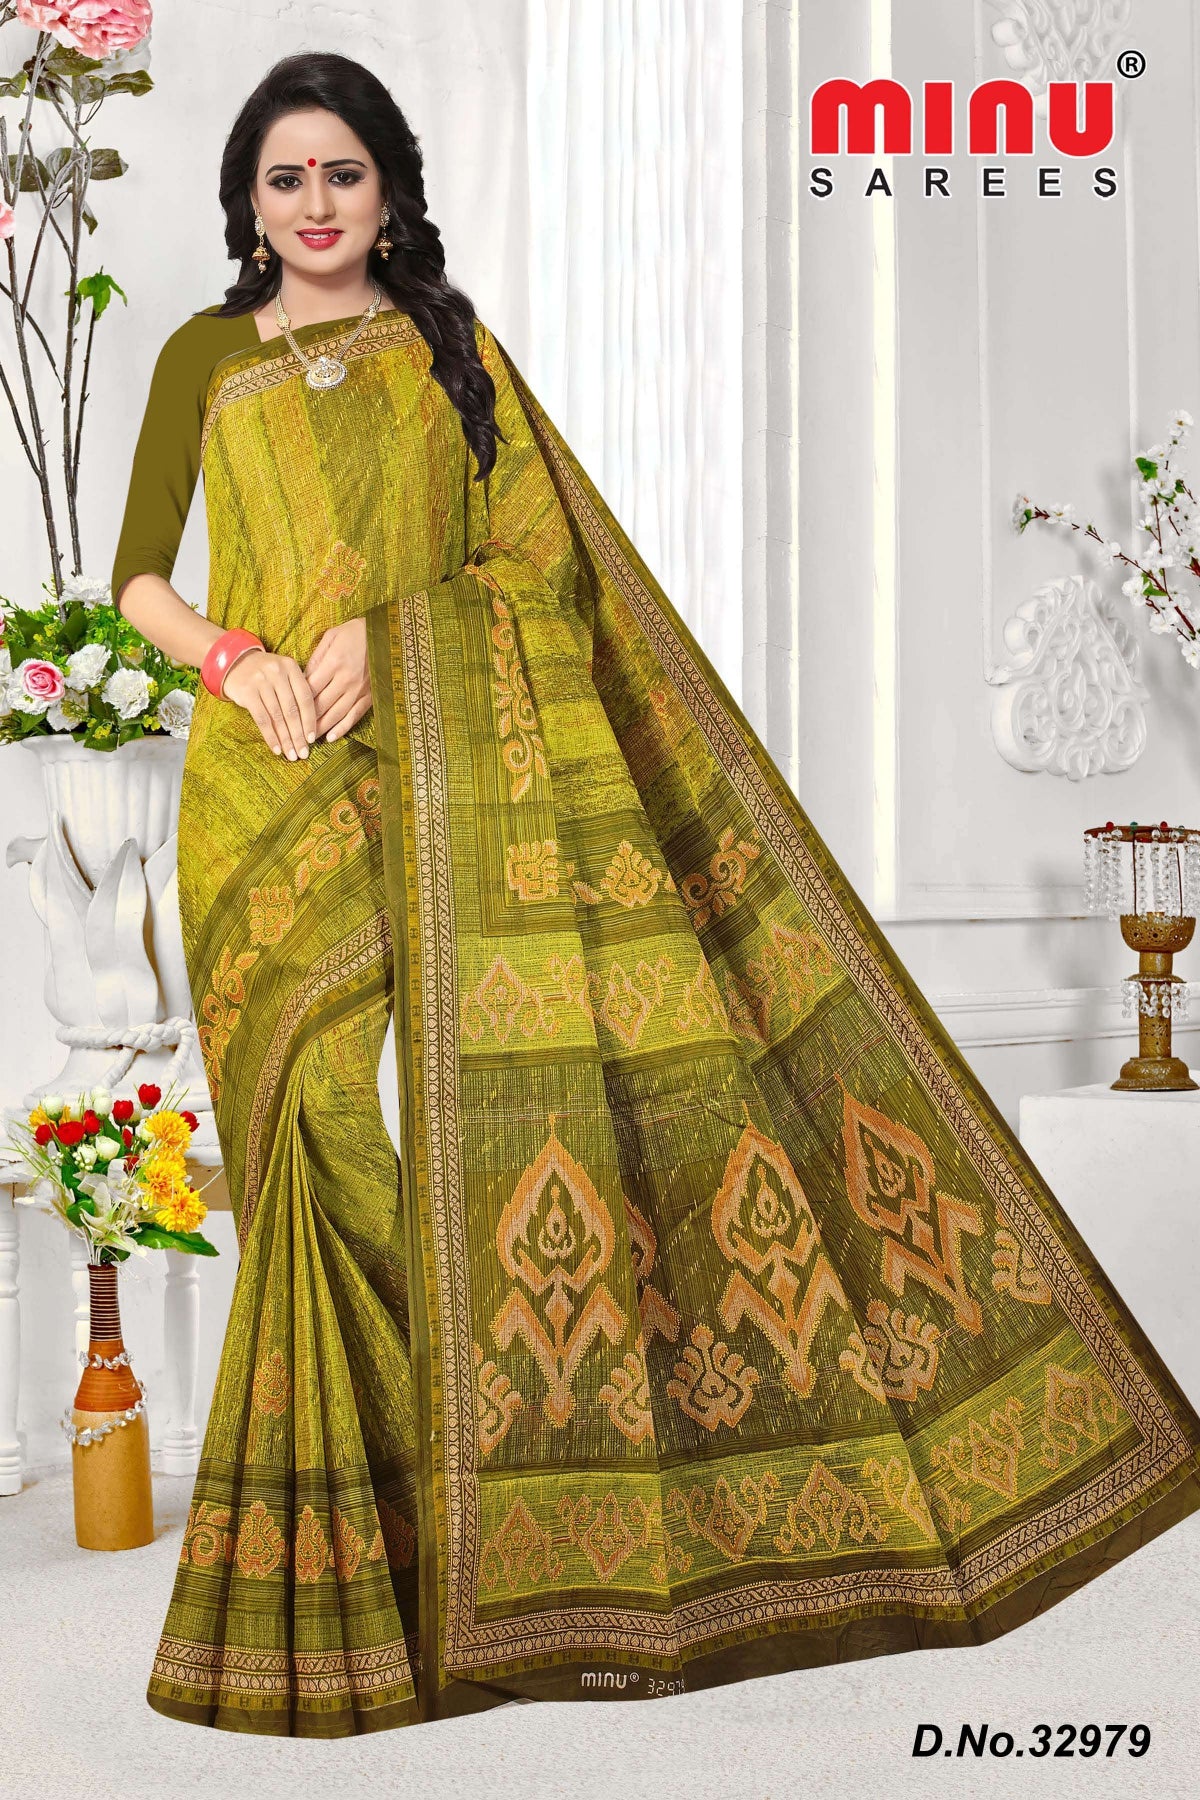 best offers of quality printed cotton saree